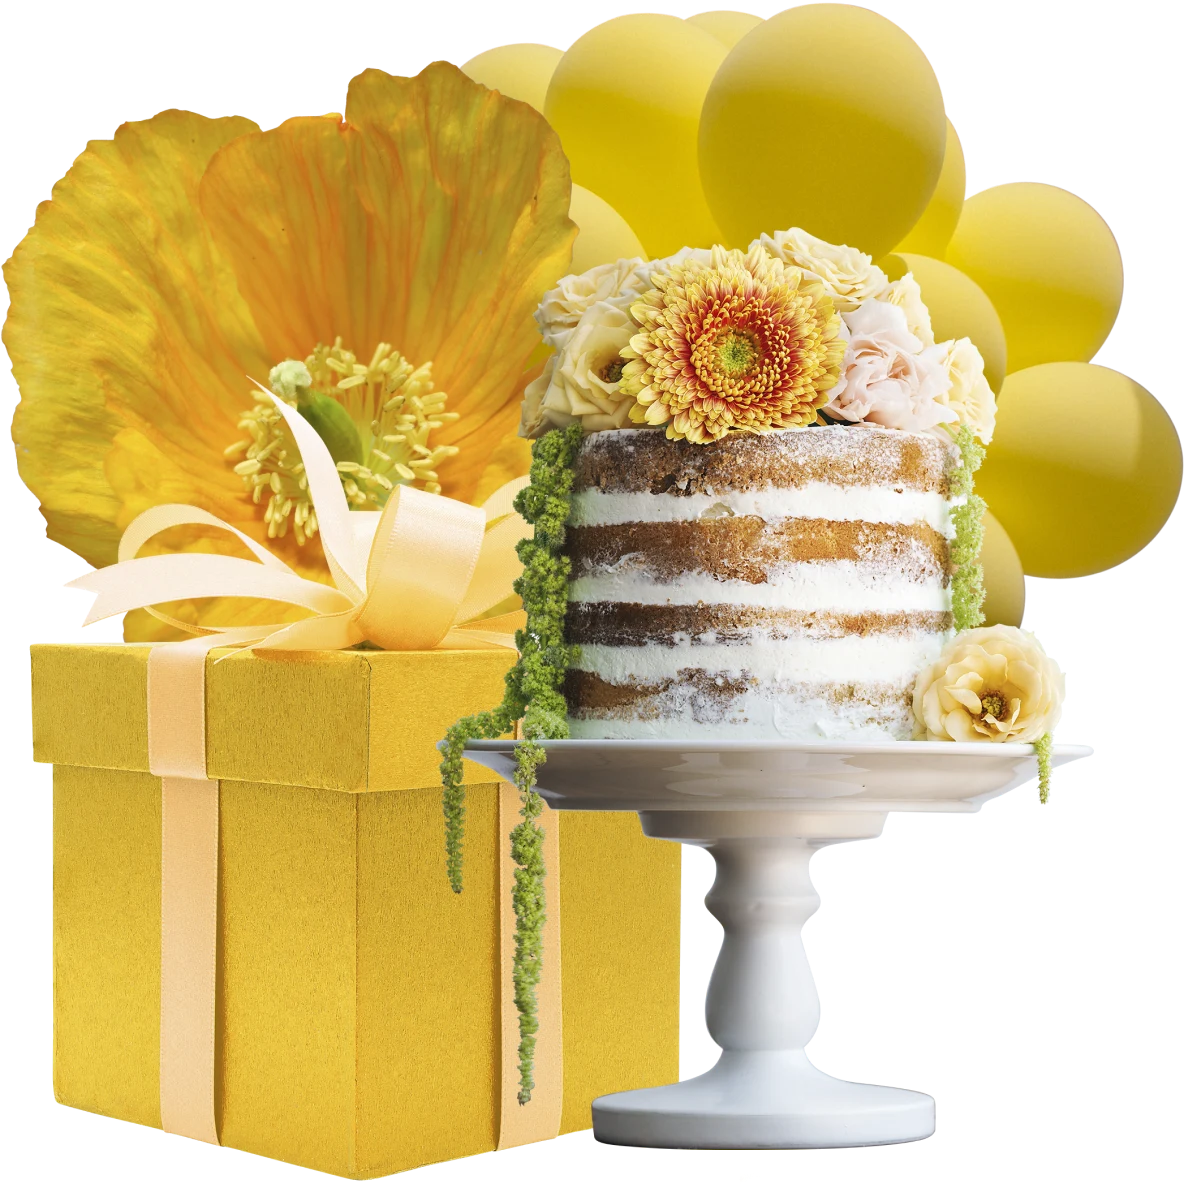 Collage of party items. Four-layer white cake on a pedestal at right. Large yellow box with pink ribbon on left. Background of large yellow flower and yellow balloons.